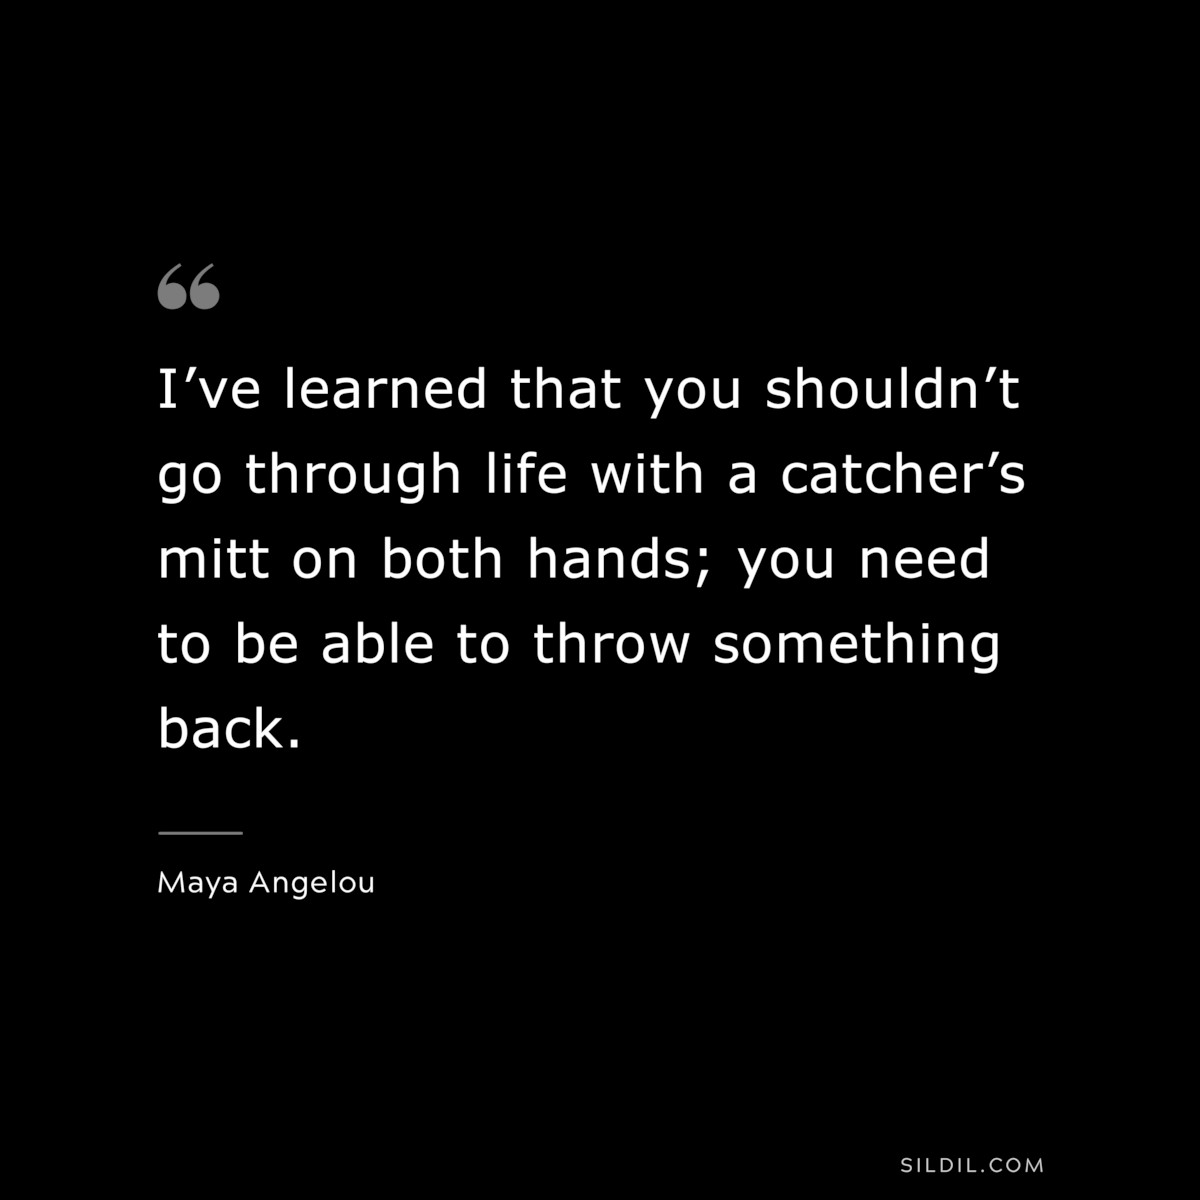 I’ve learned that you shouldn’t go through life with a catcher’s mitt on both hands; you need to be able to throw something back. ― Maya Angelou